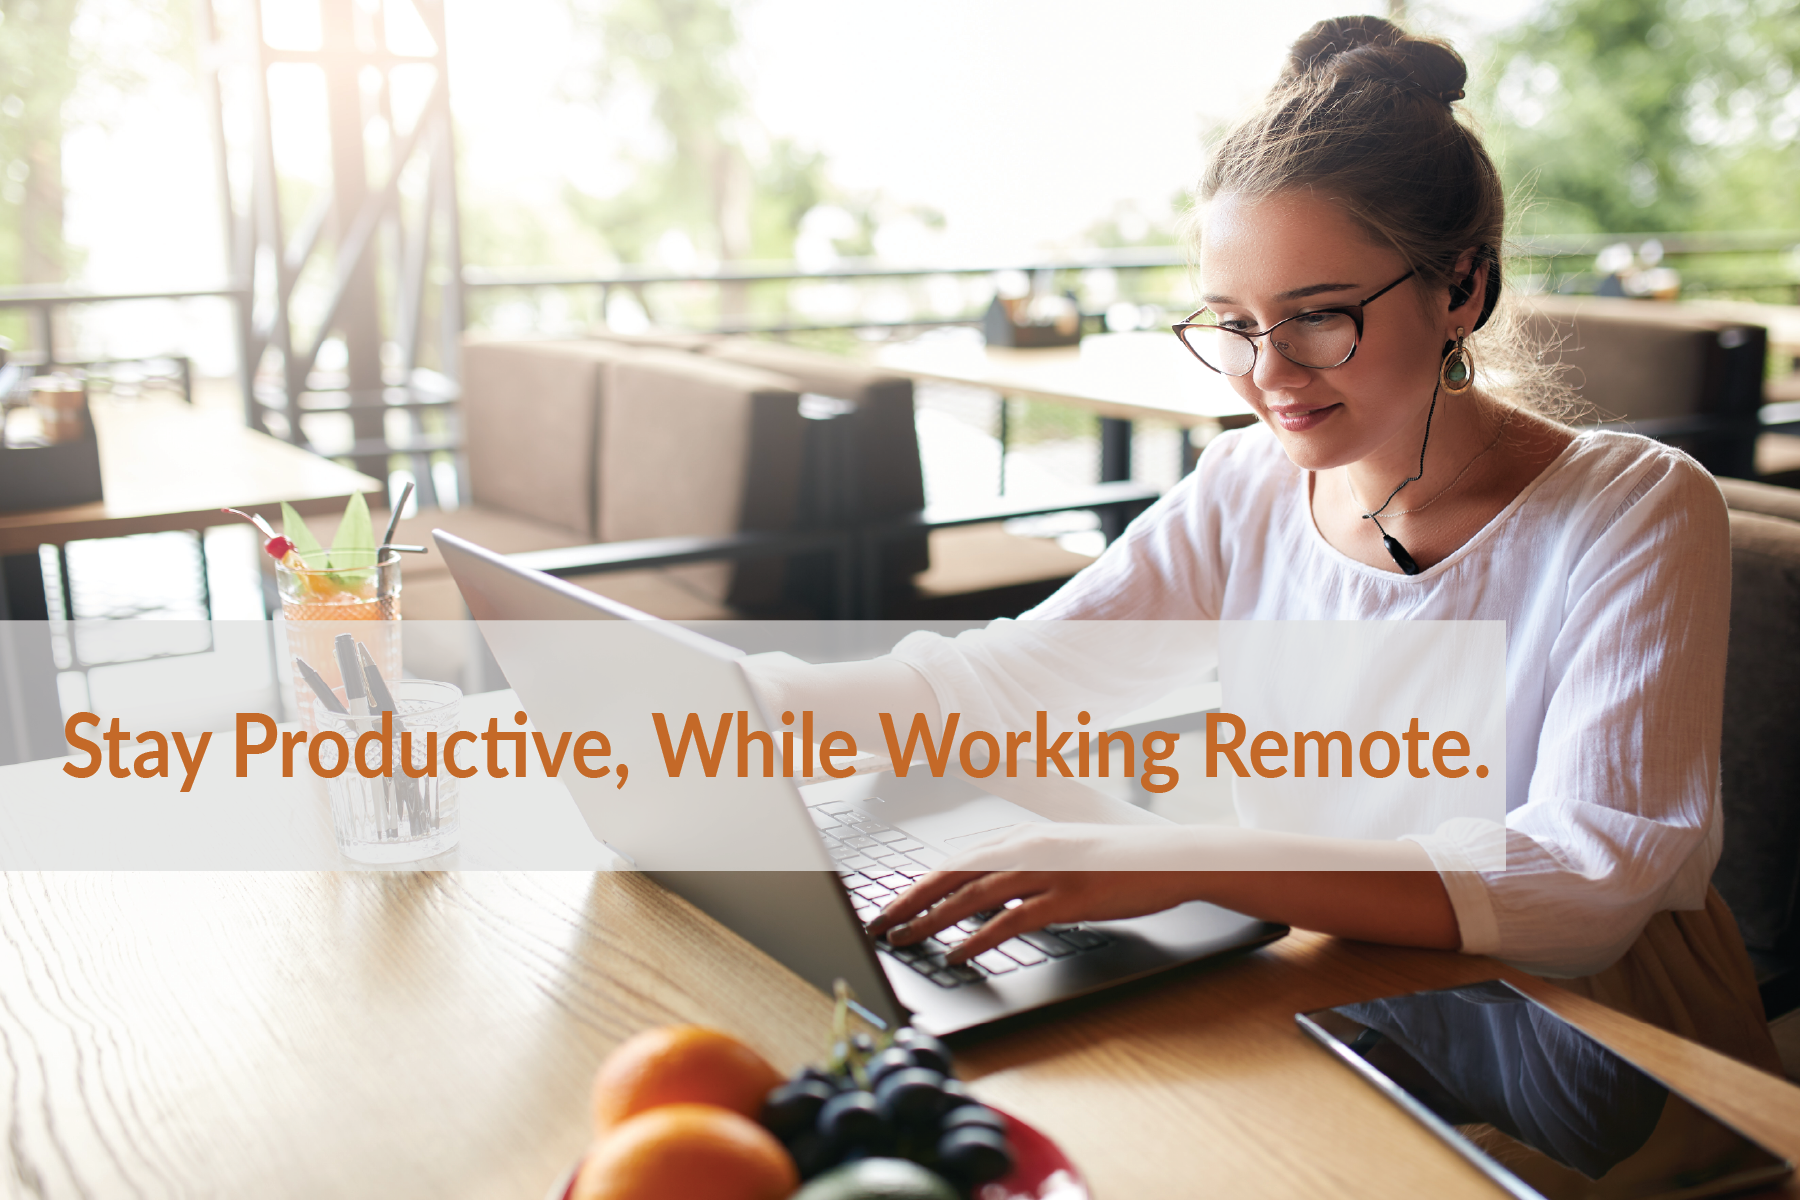 Stay Productive, While Working Remote